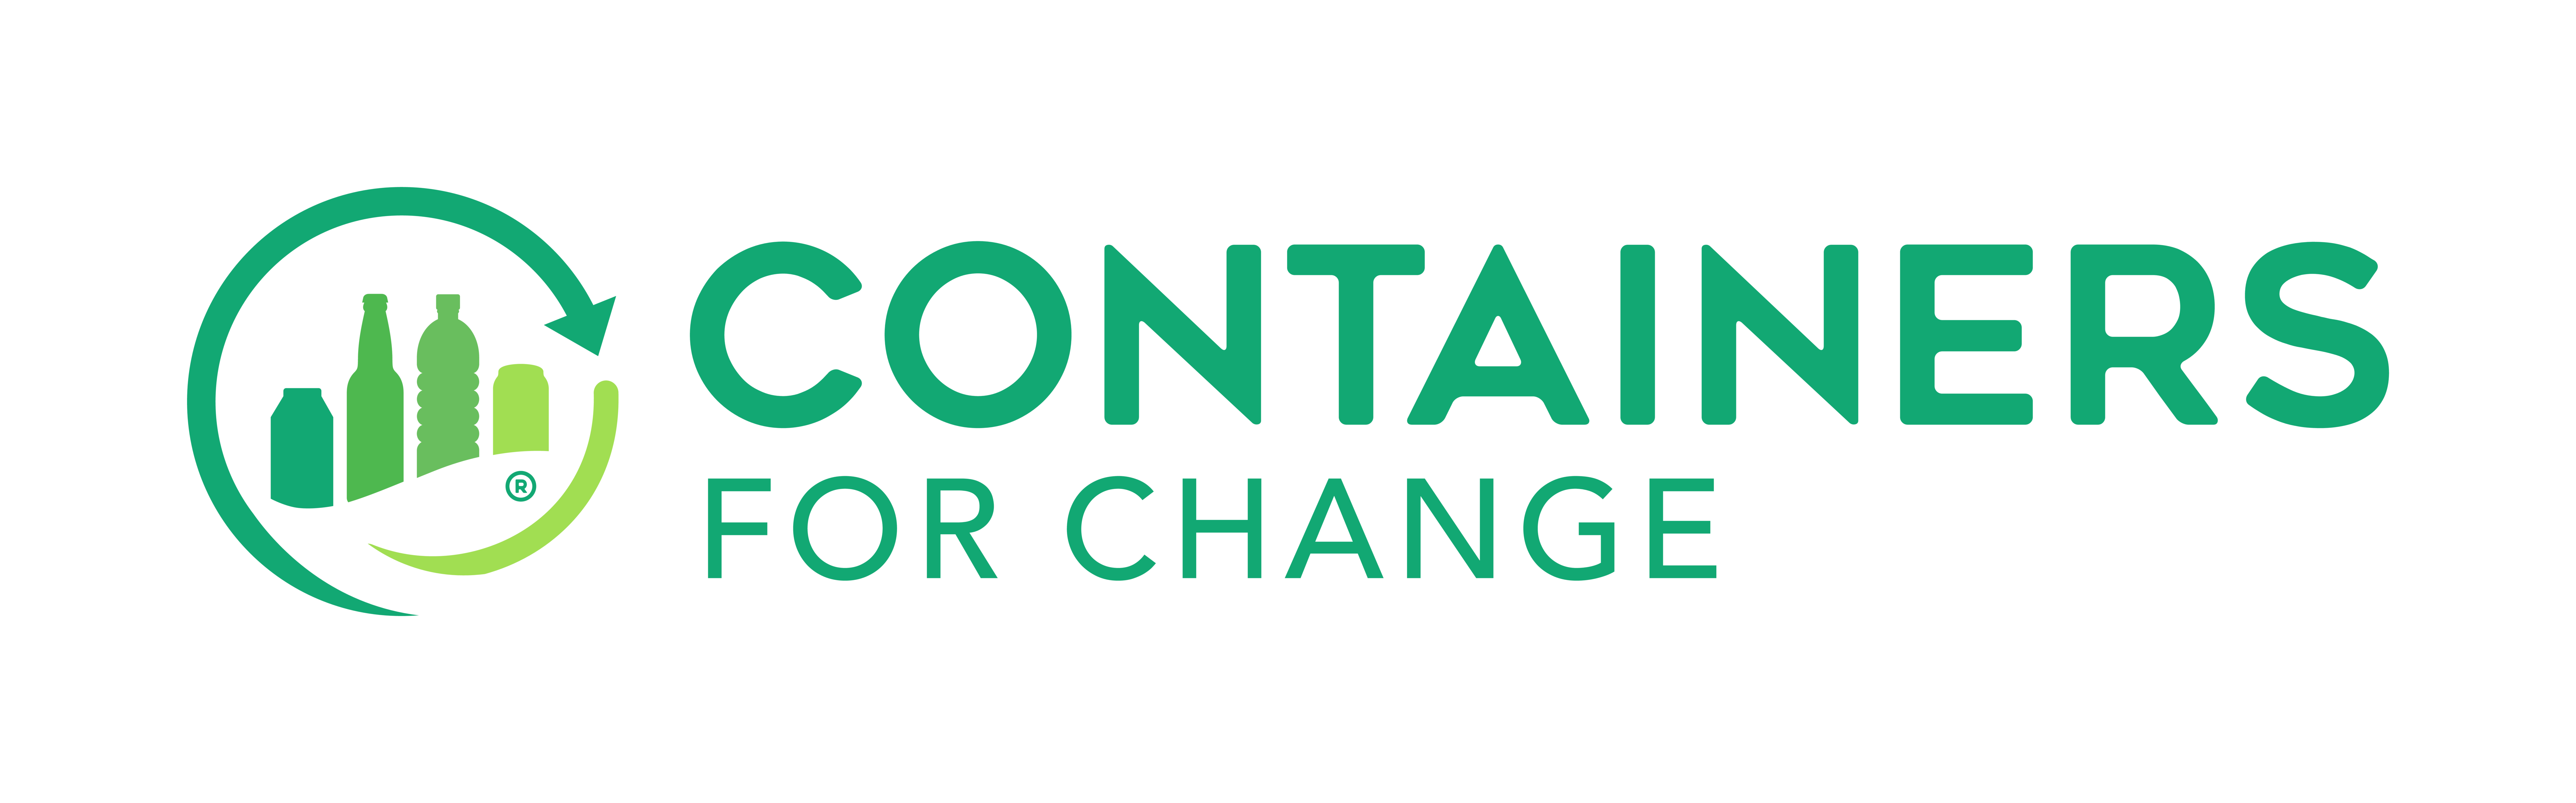 Container for change logo